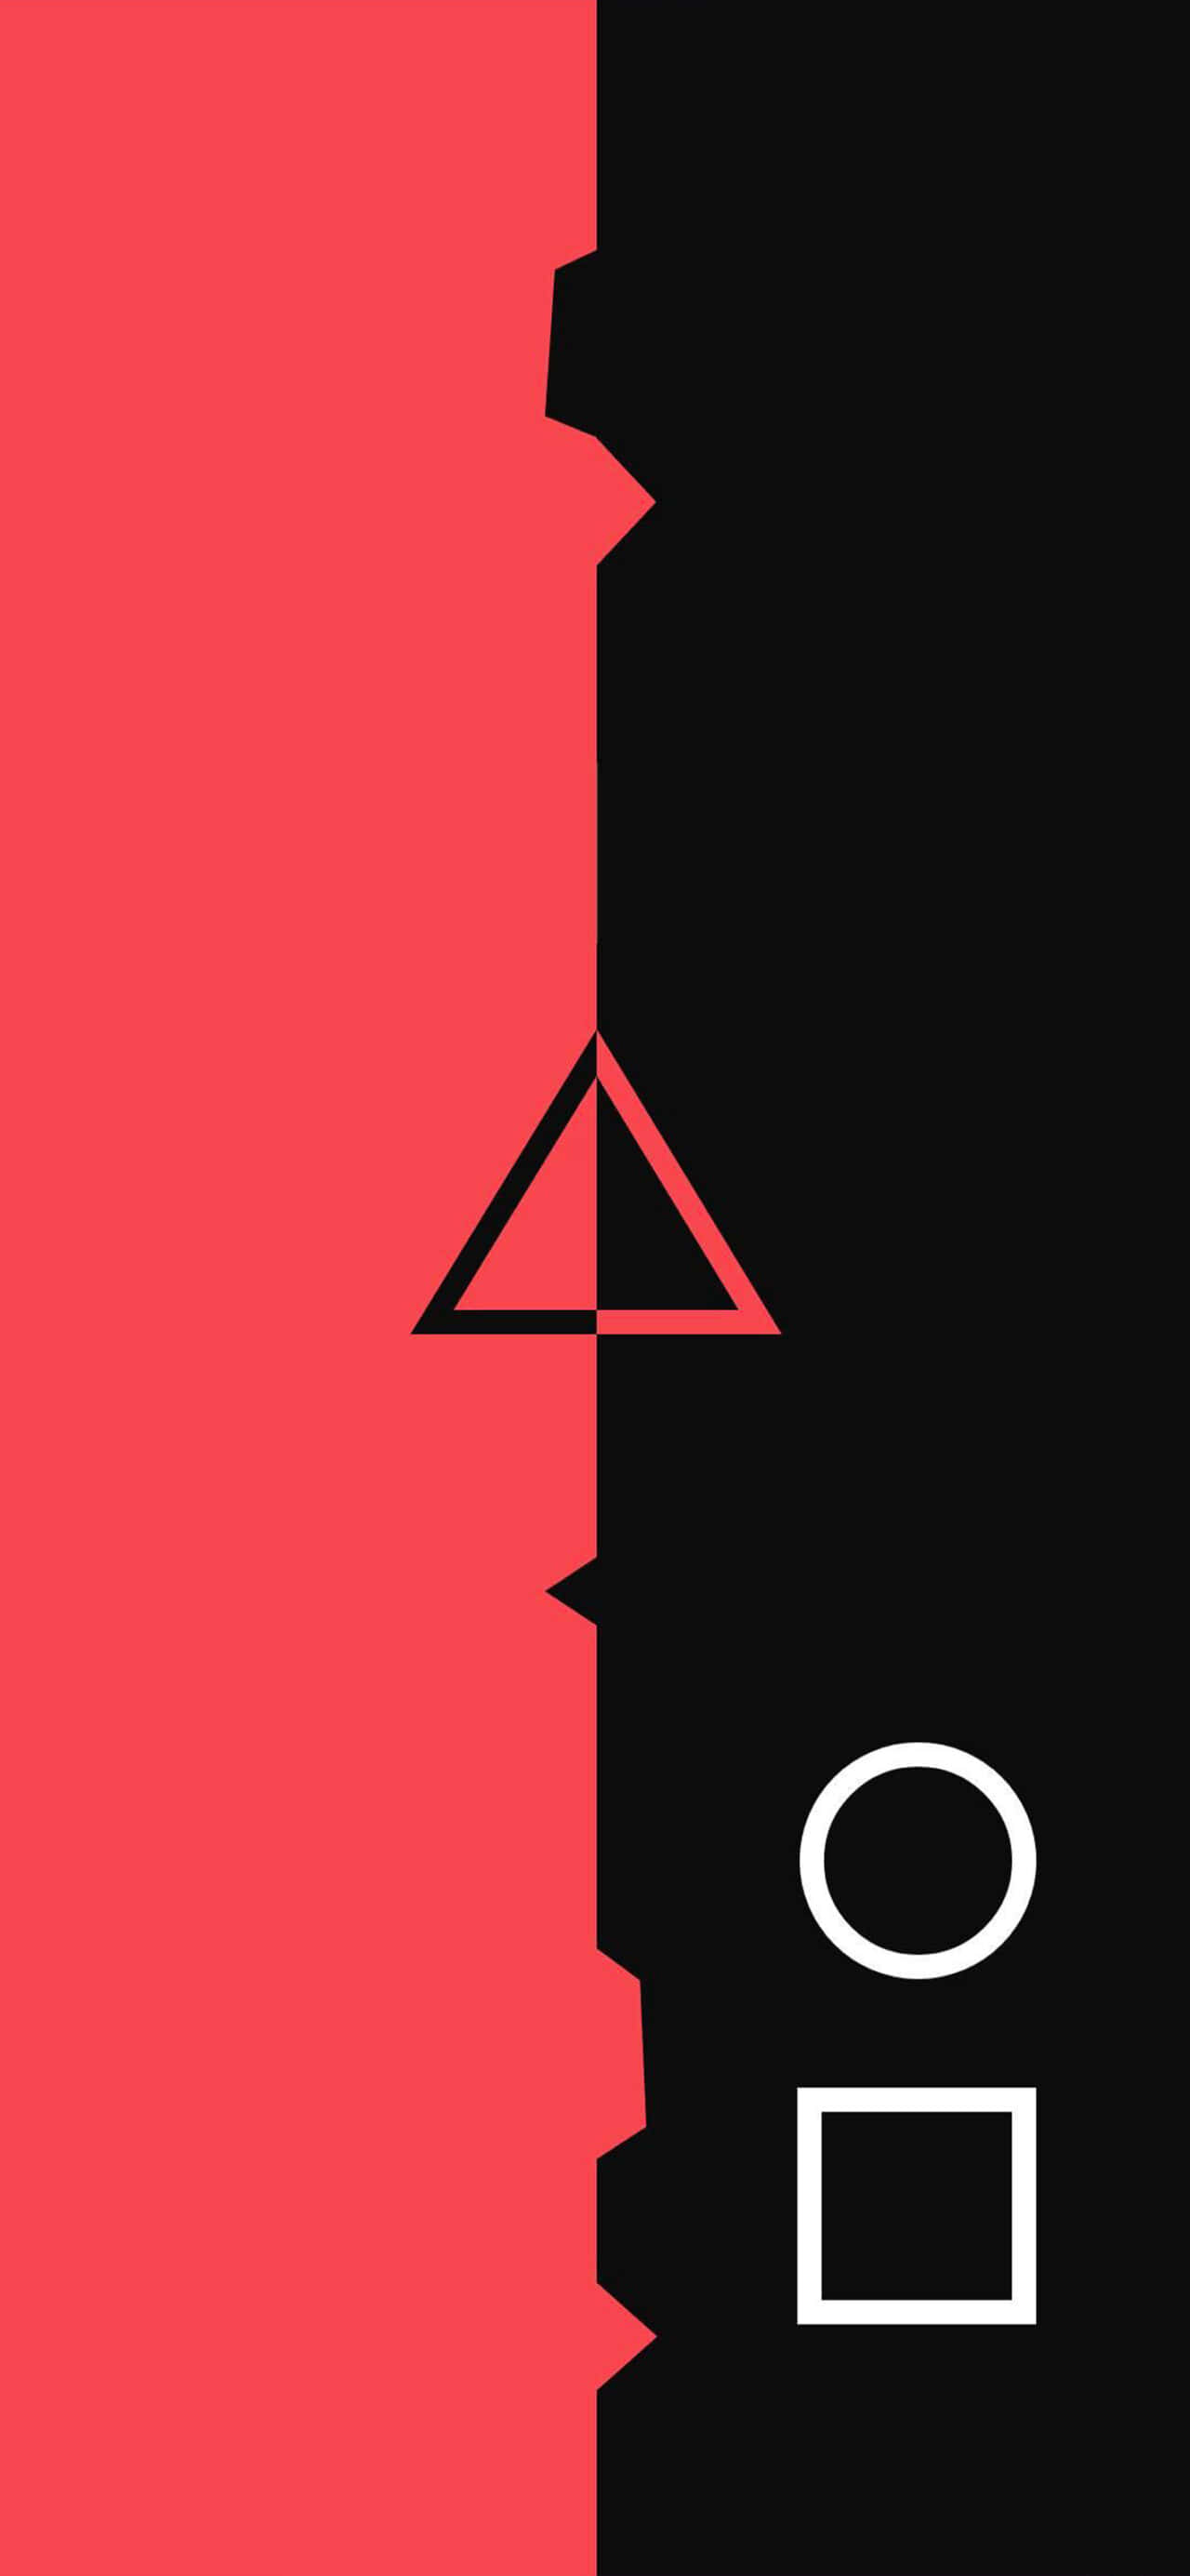 A Black And Red Cover With A Triangle In The Middle